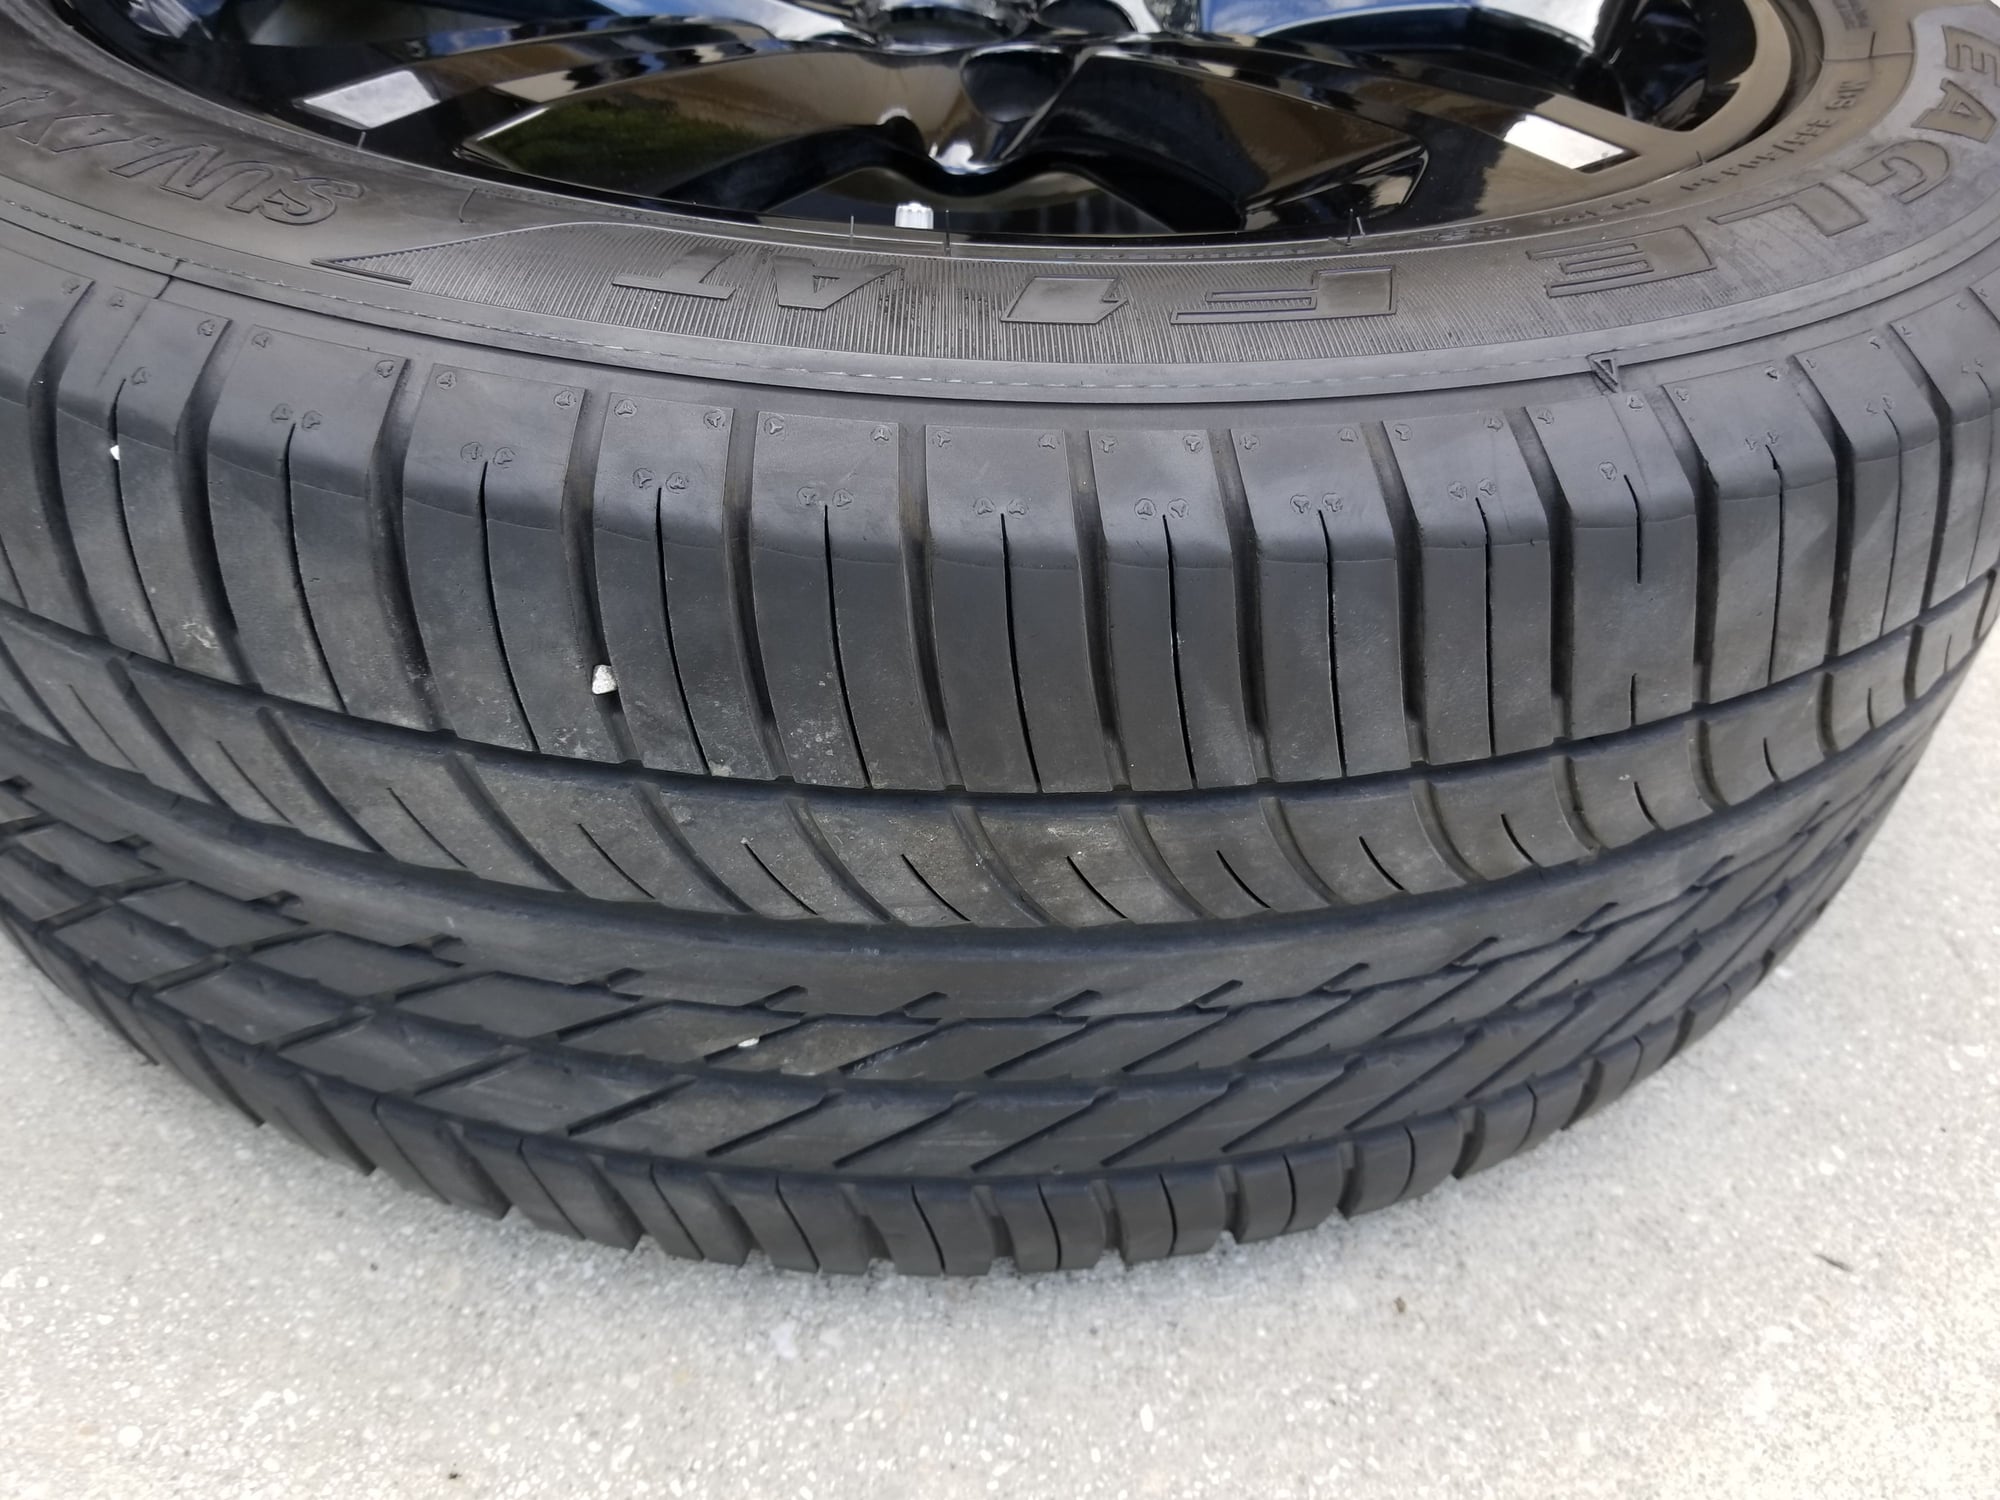 Wheels and Tires/Axles - 20-inch Jaguar F-Pace Factory Black Rims with Goodyear tires - $2000 - Used - 2017 to 2019 Jaguar F-Pace - San Antonio, TX 78261, United States